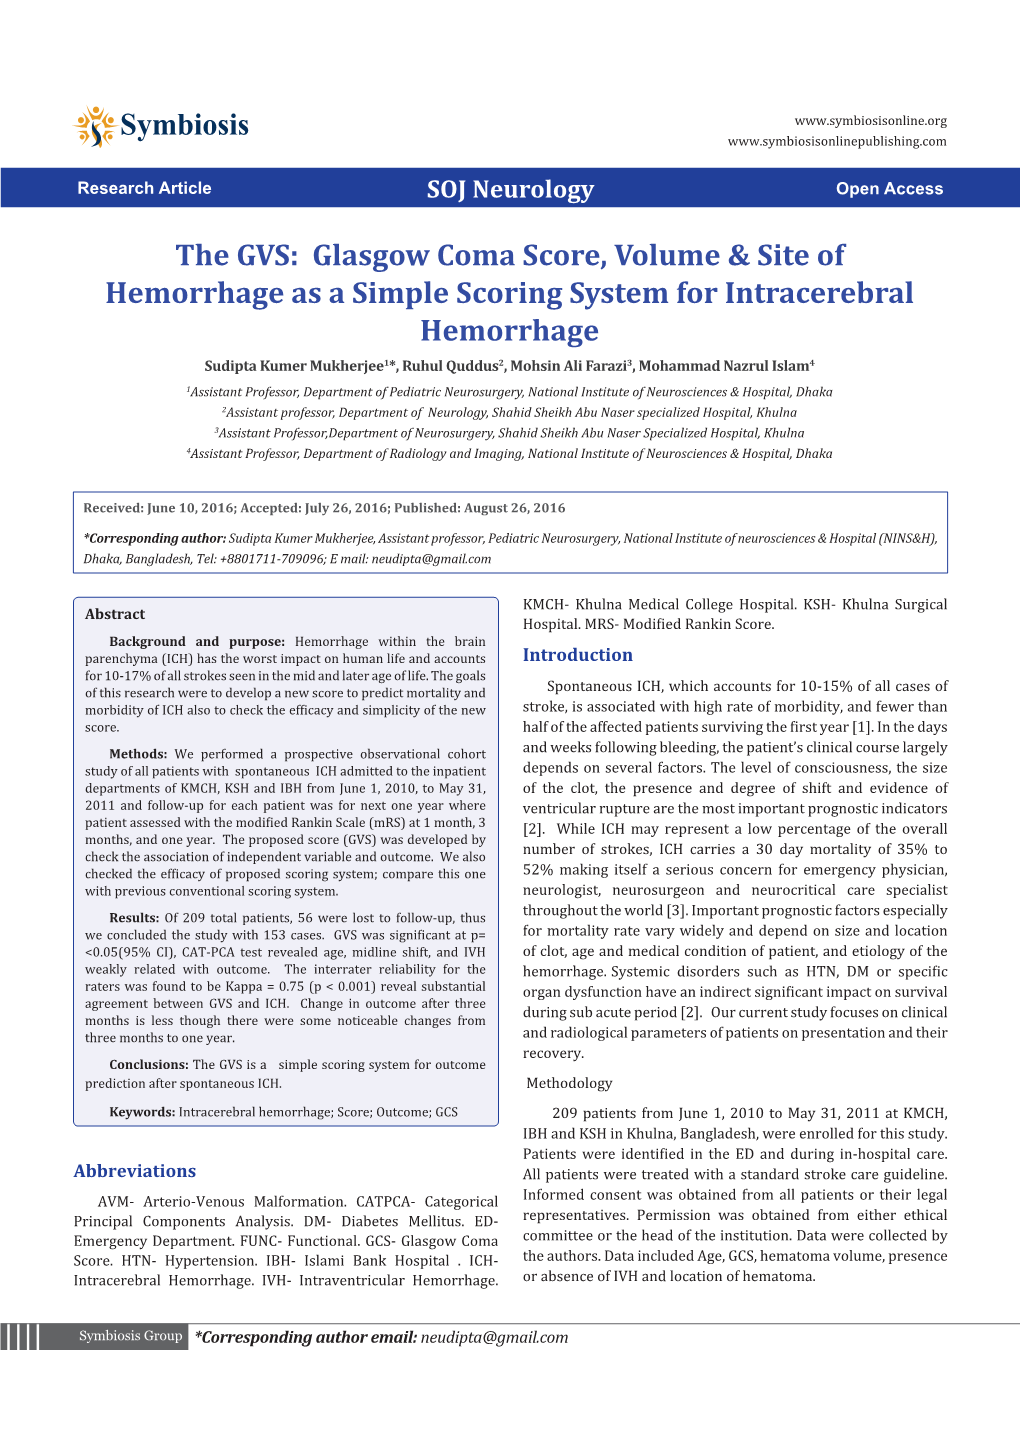 Glasgow Coma Score, Volume & Site of Hemorrhage As a Simple